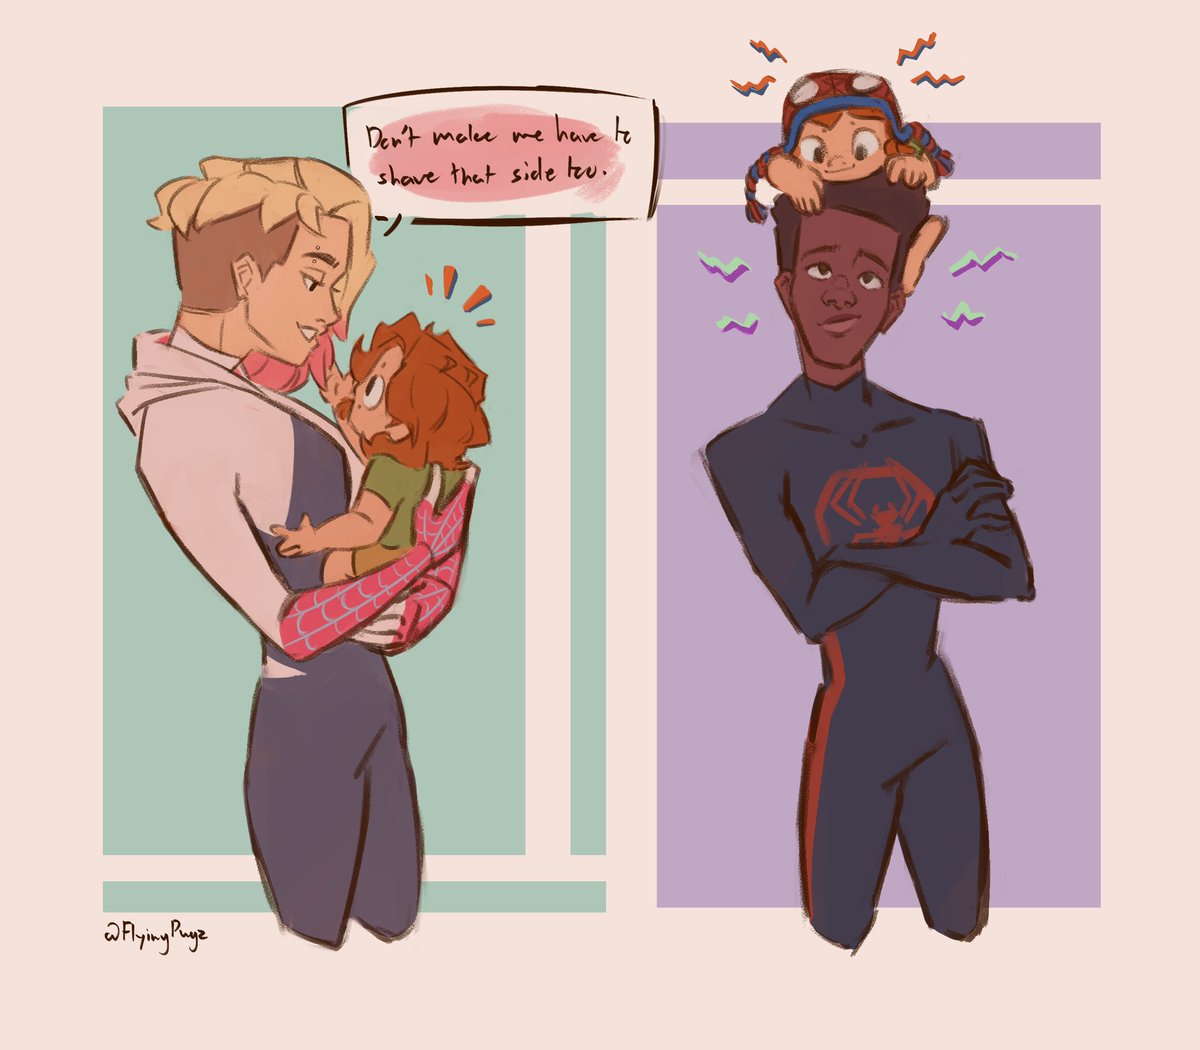 more of mayday w her babysitters bc she loves em all :]
.
.
#spidergwen #MilesMorales #GwenStacy #maydayparker #AcrossTheSpiderVerse